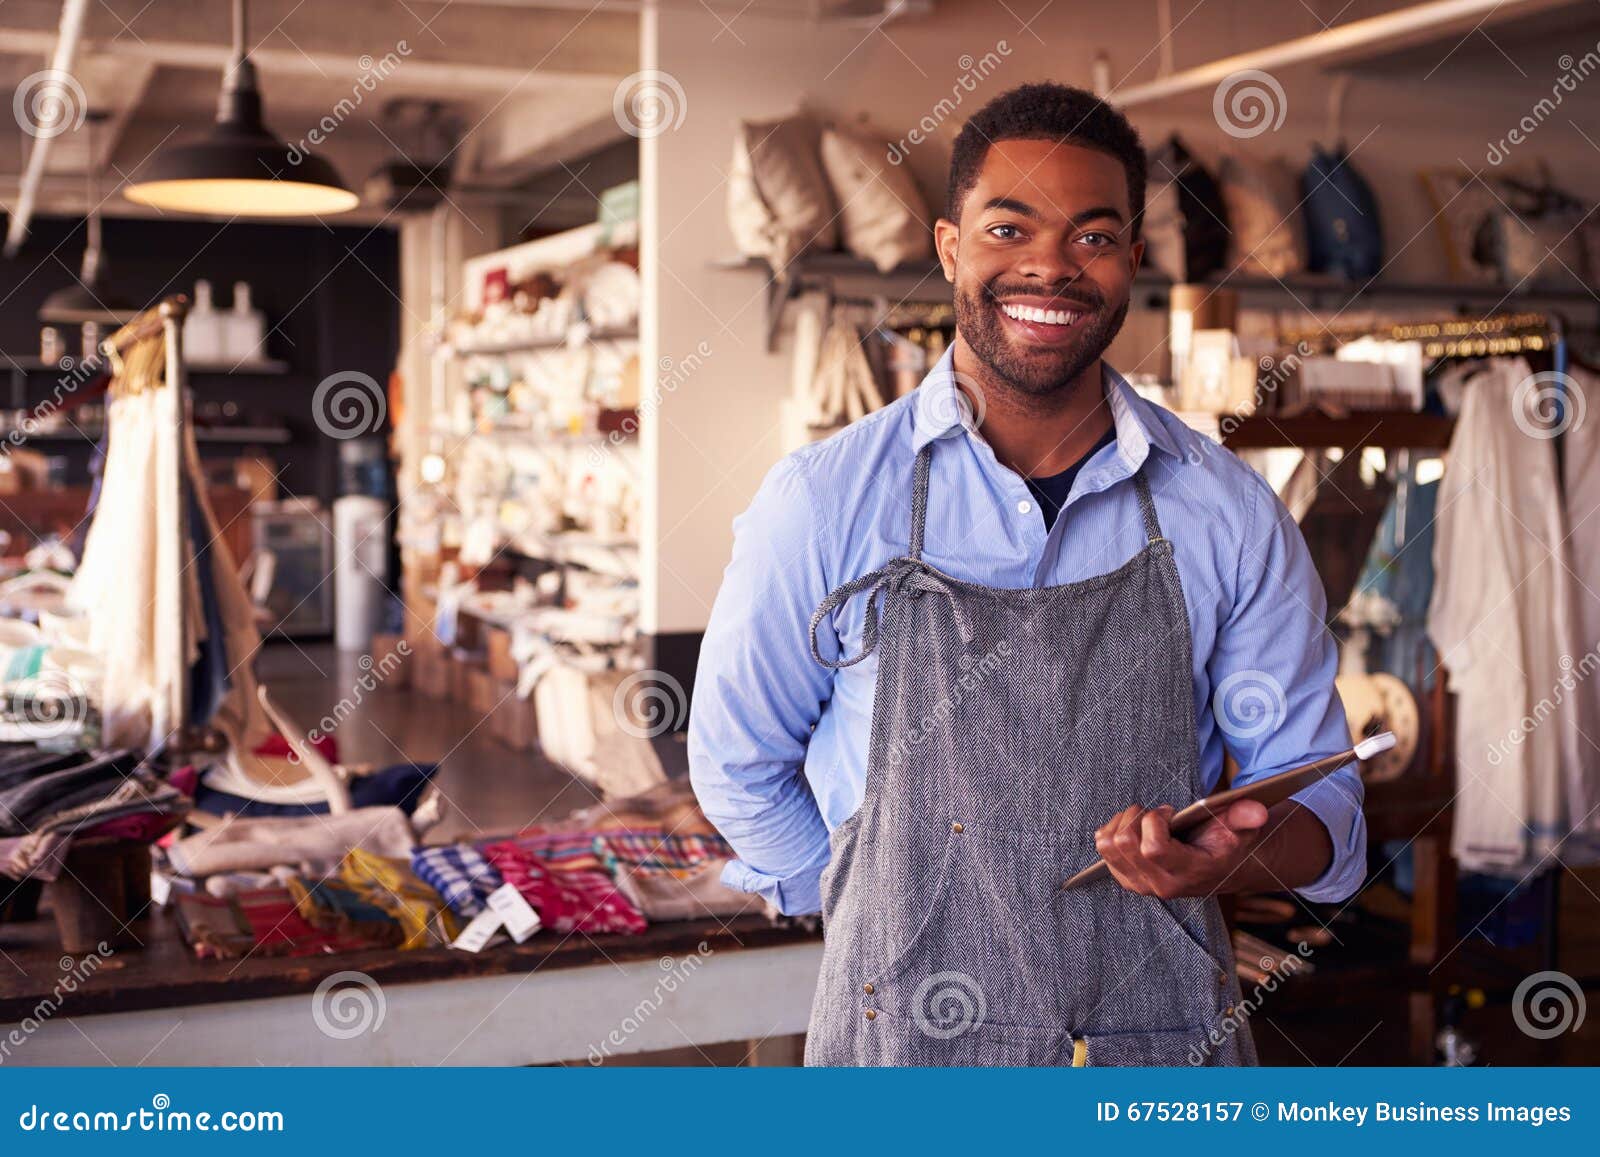 portrait of male owner of gift store with digital tablet